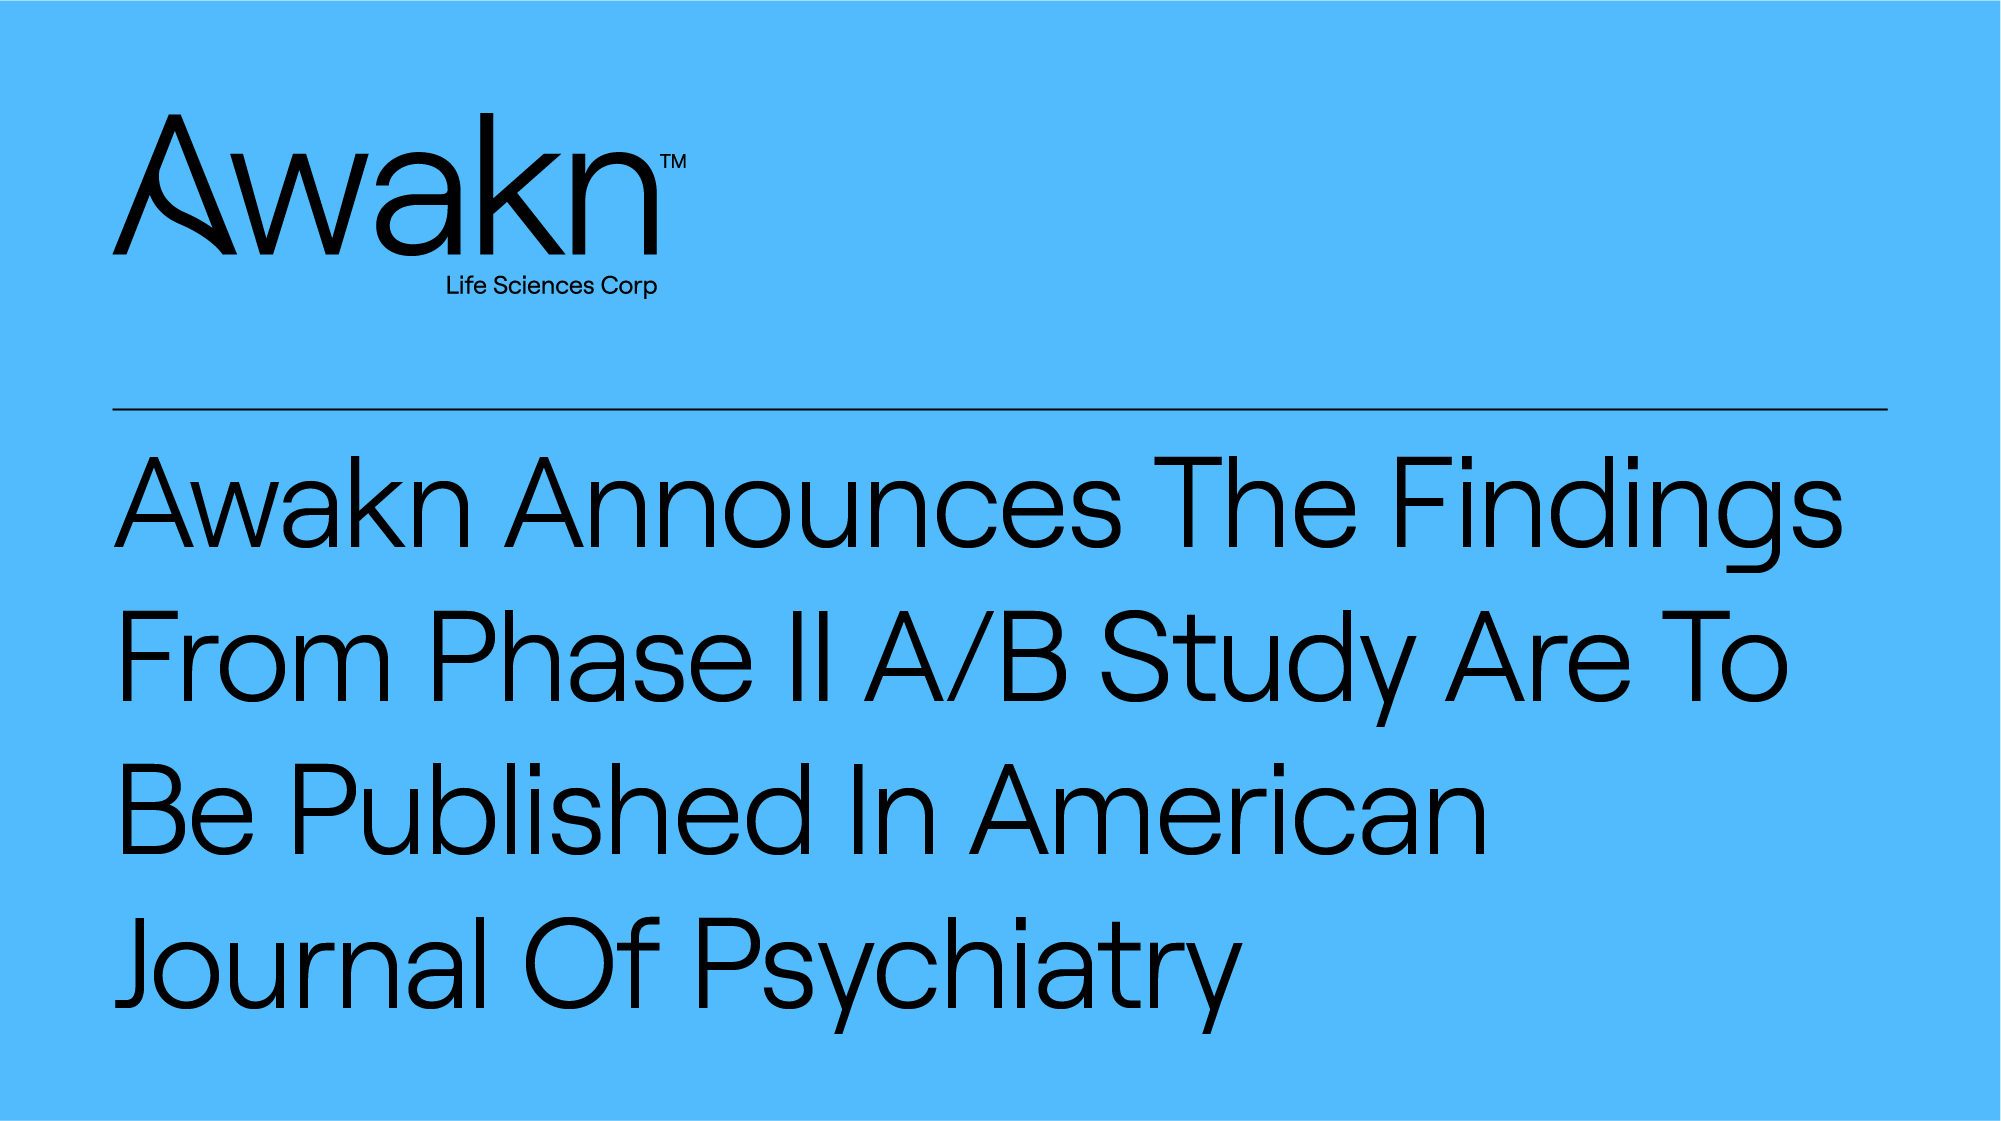 Awakn Announces The Findings From Phase Ii A/B Study Are To Be Published In American Journal Of Psychiatry